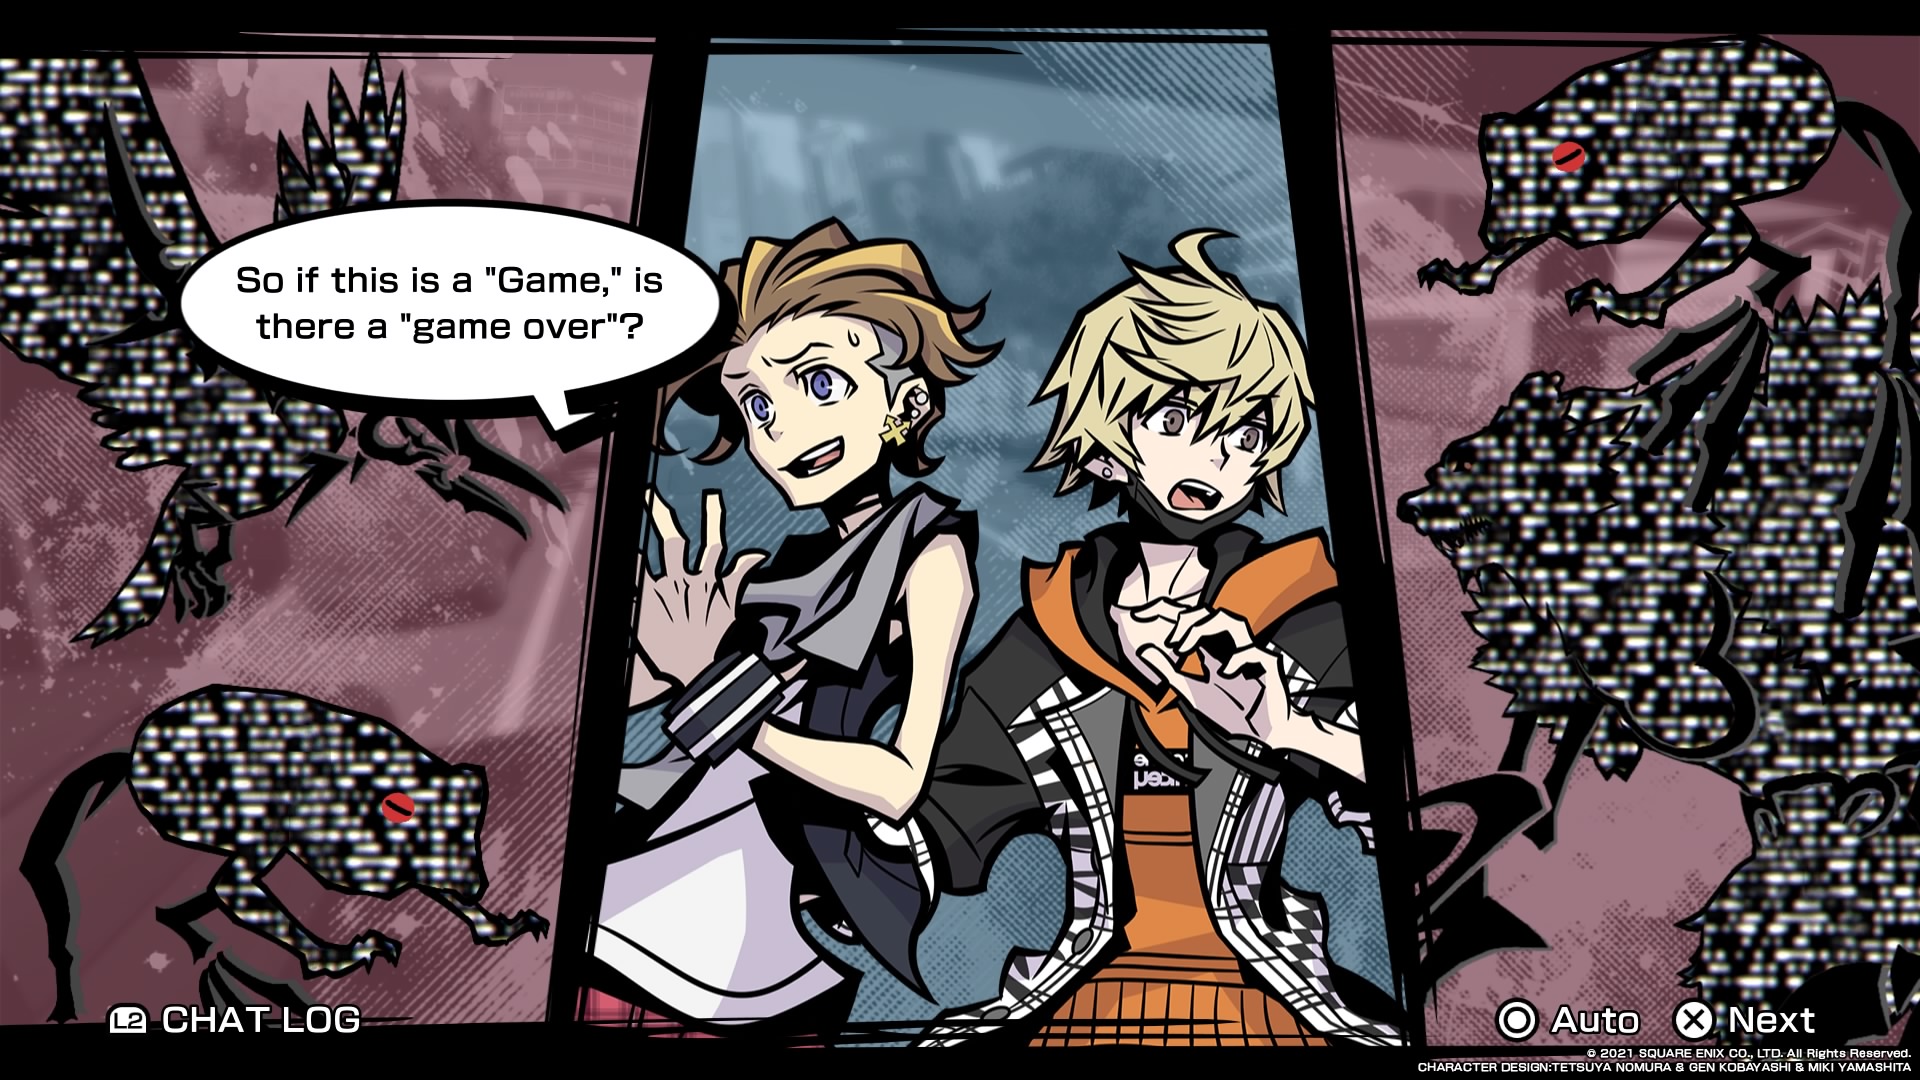 THE WORLD ENDS WITH YOU by Nomura Tetsuya